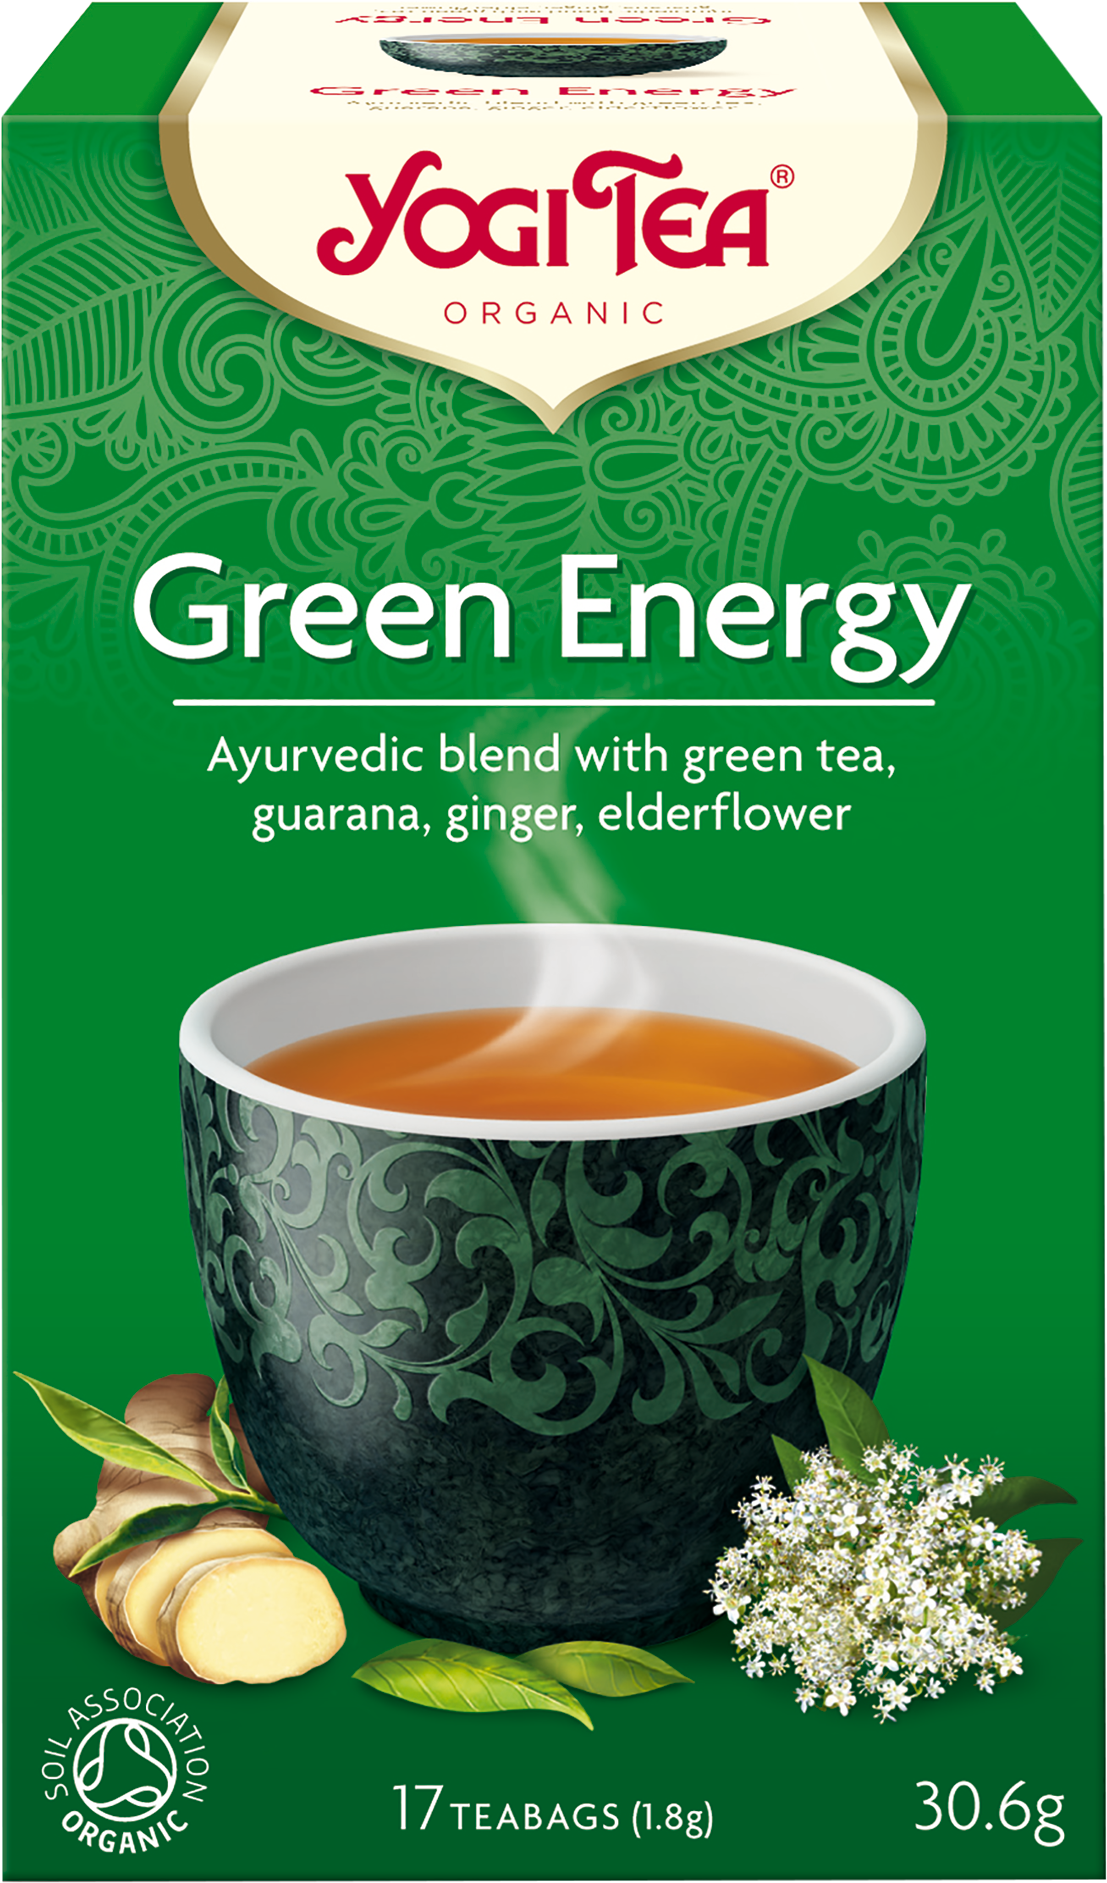 A Green Tea Package With A Cup Of Tea